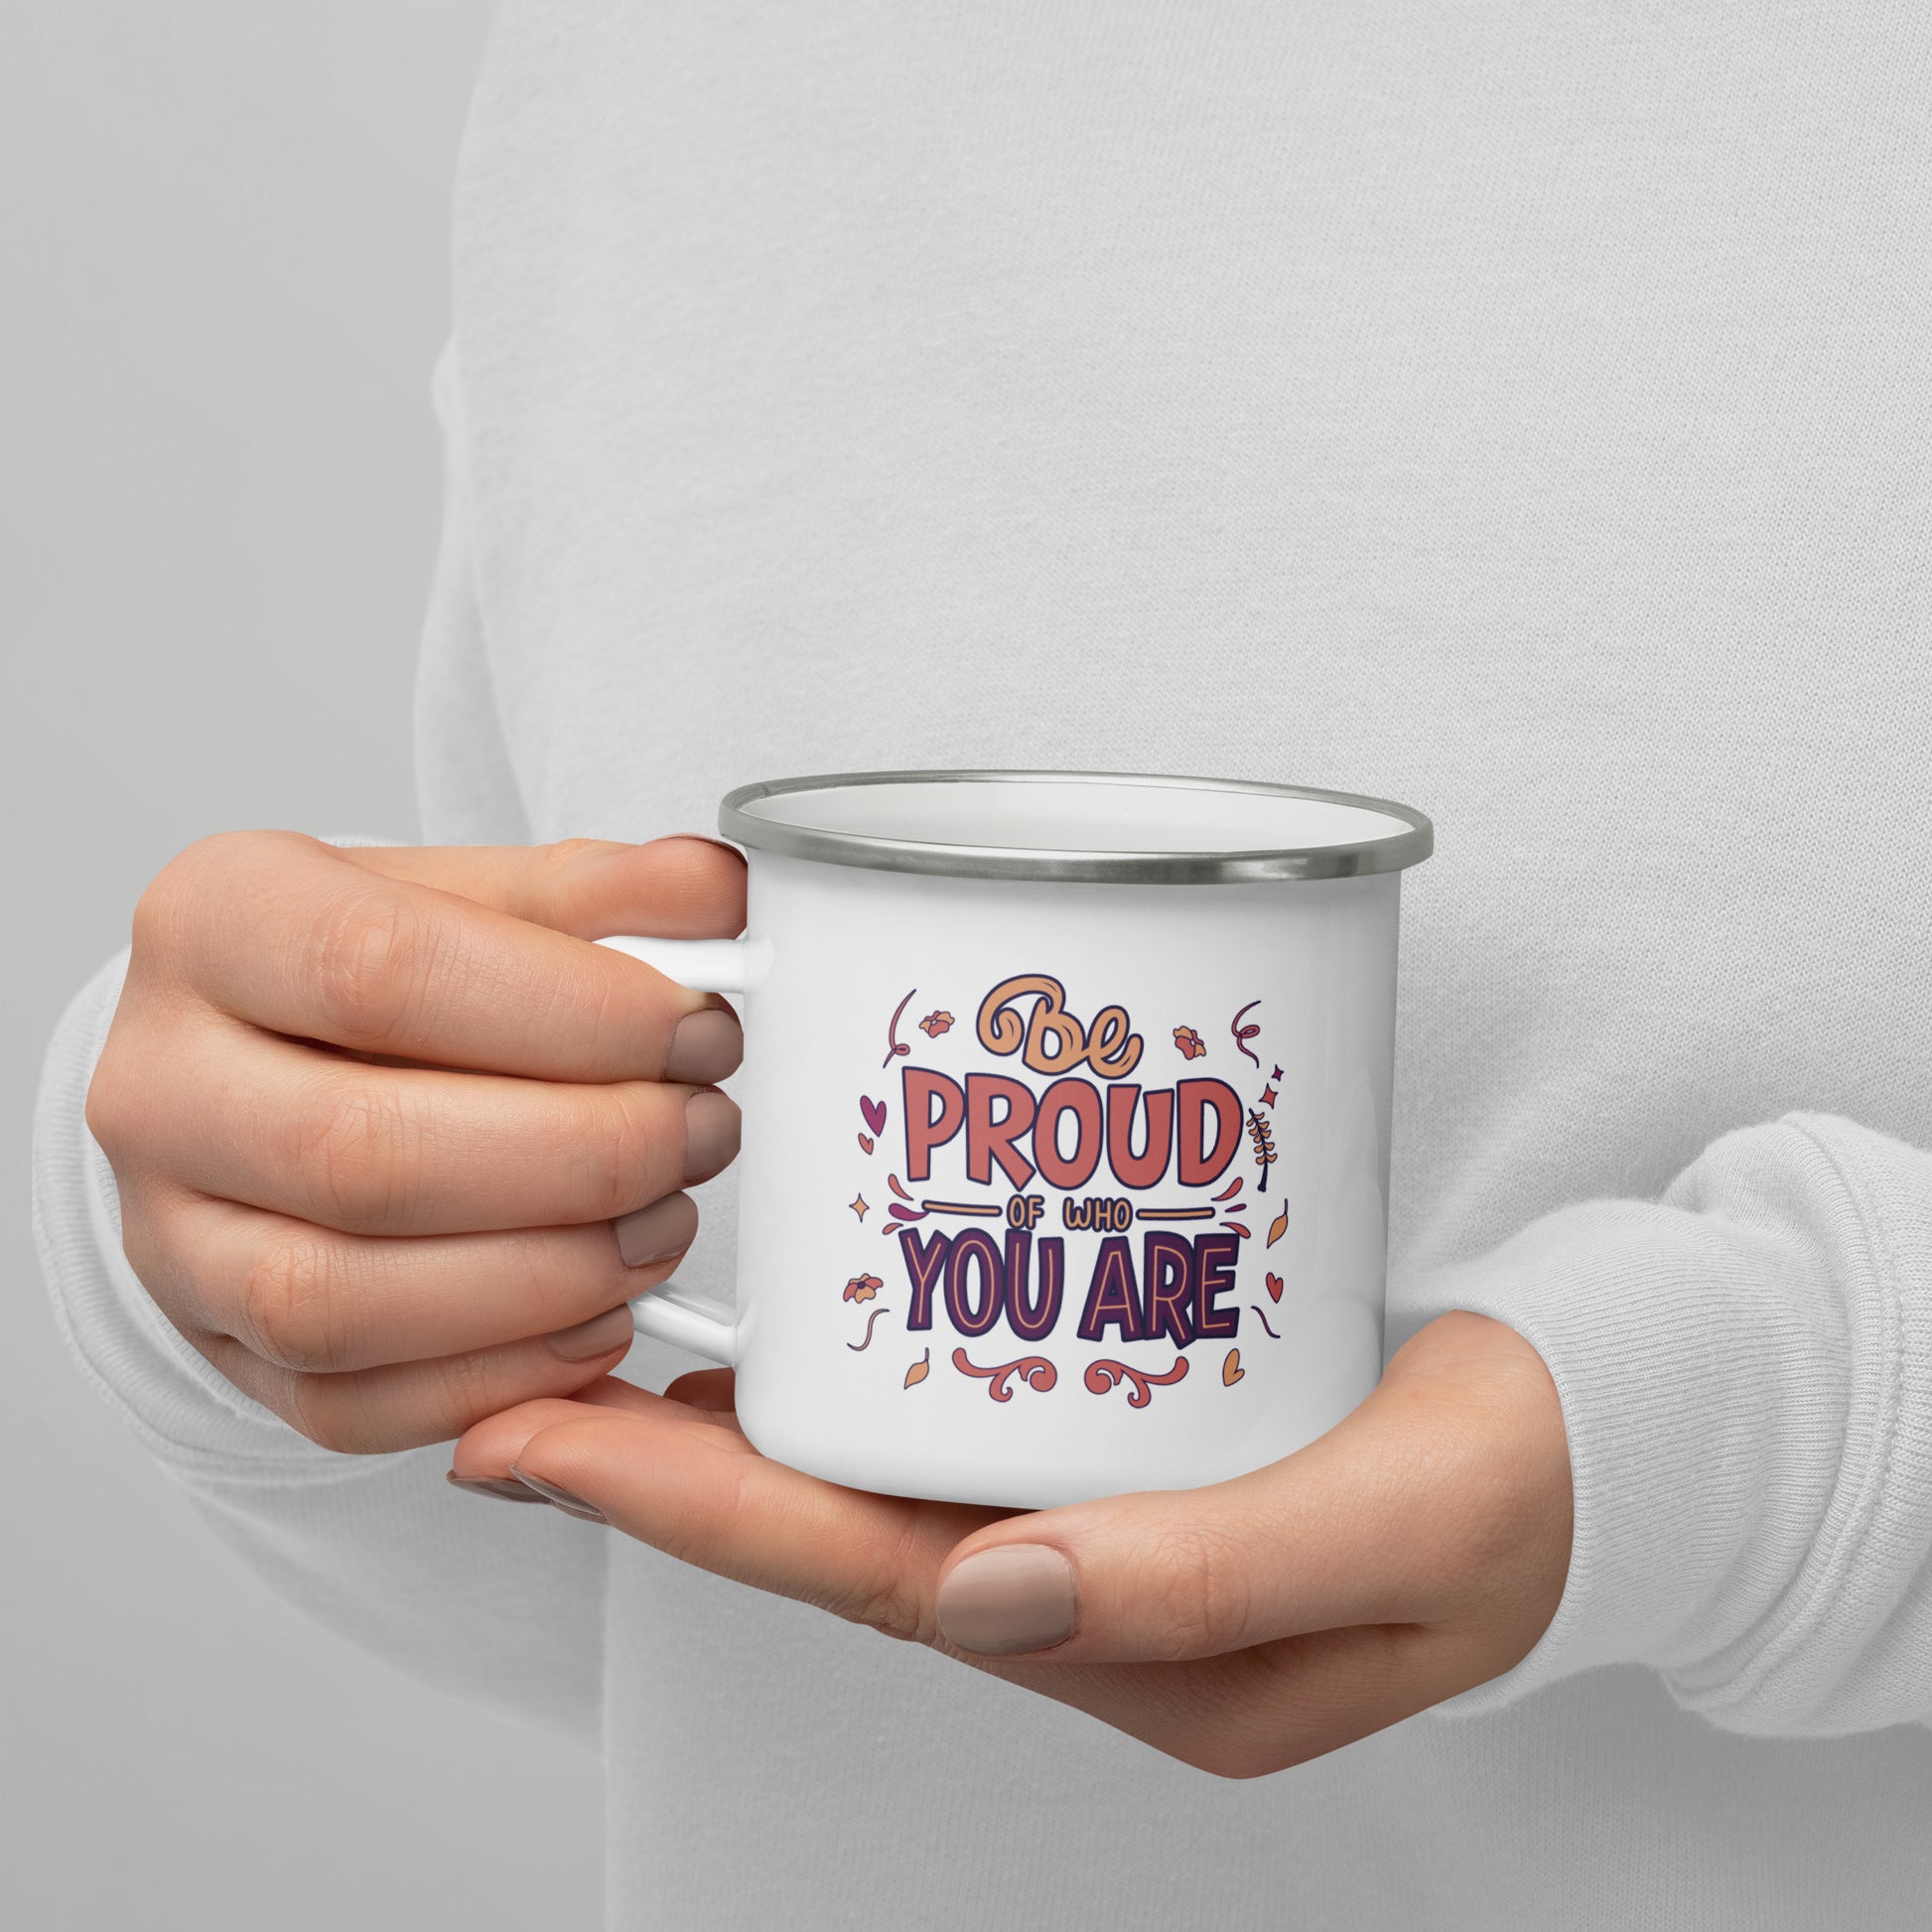 Niccie's Embrace Your Uniqueness with our Enamel Mug - Be Proud of Who You Are!